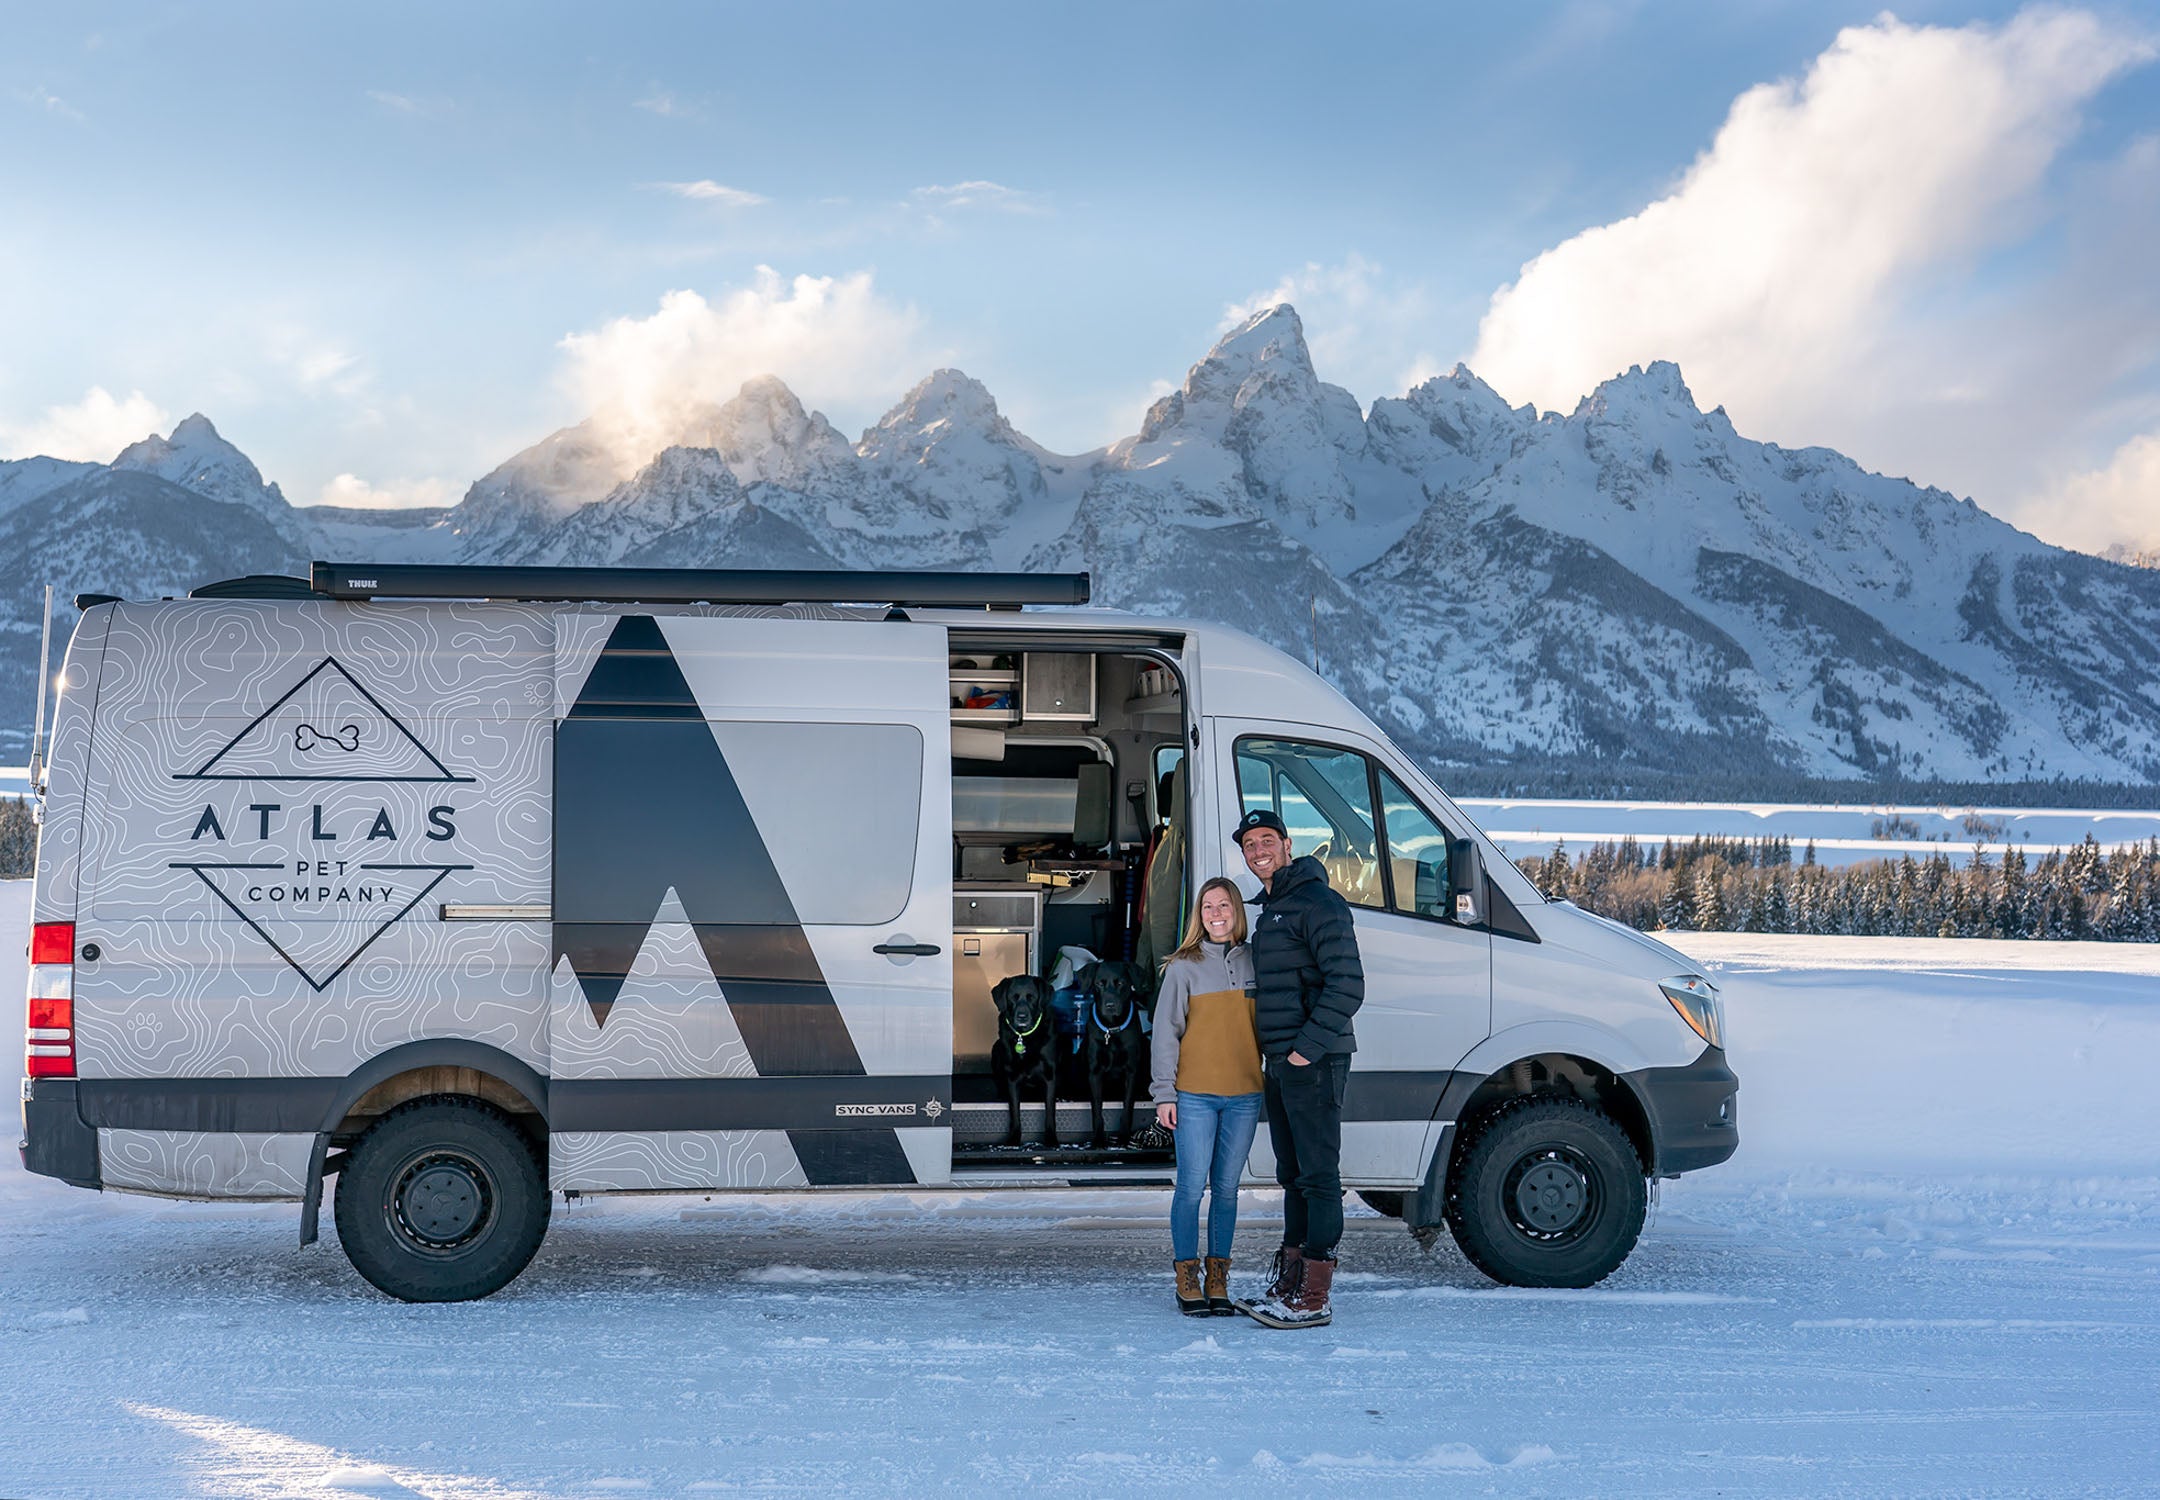 the atlas pet company van with the founder Sam Alter and his girlfriend in front of mountain back drop